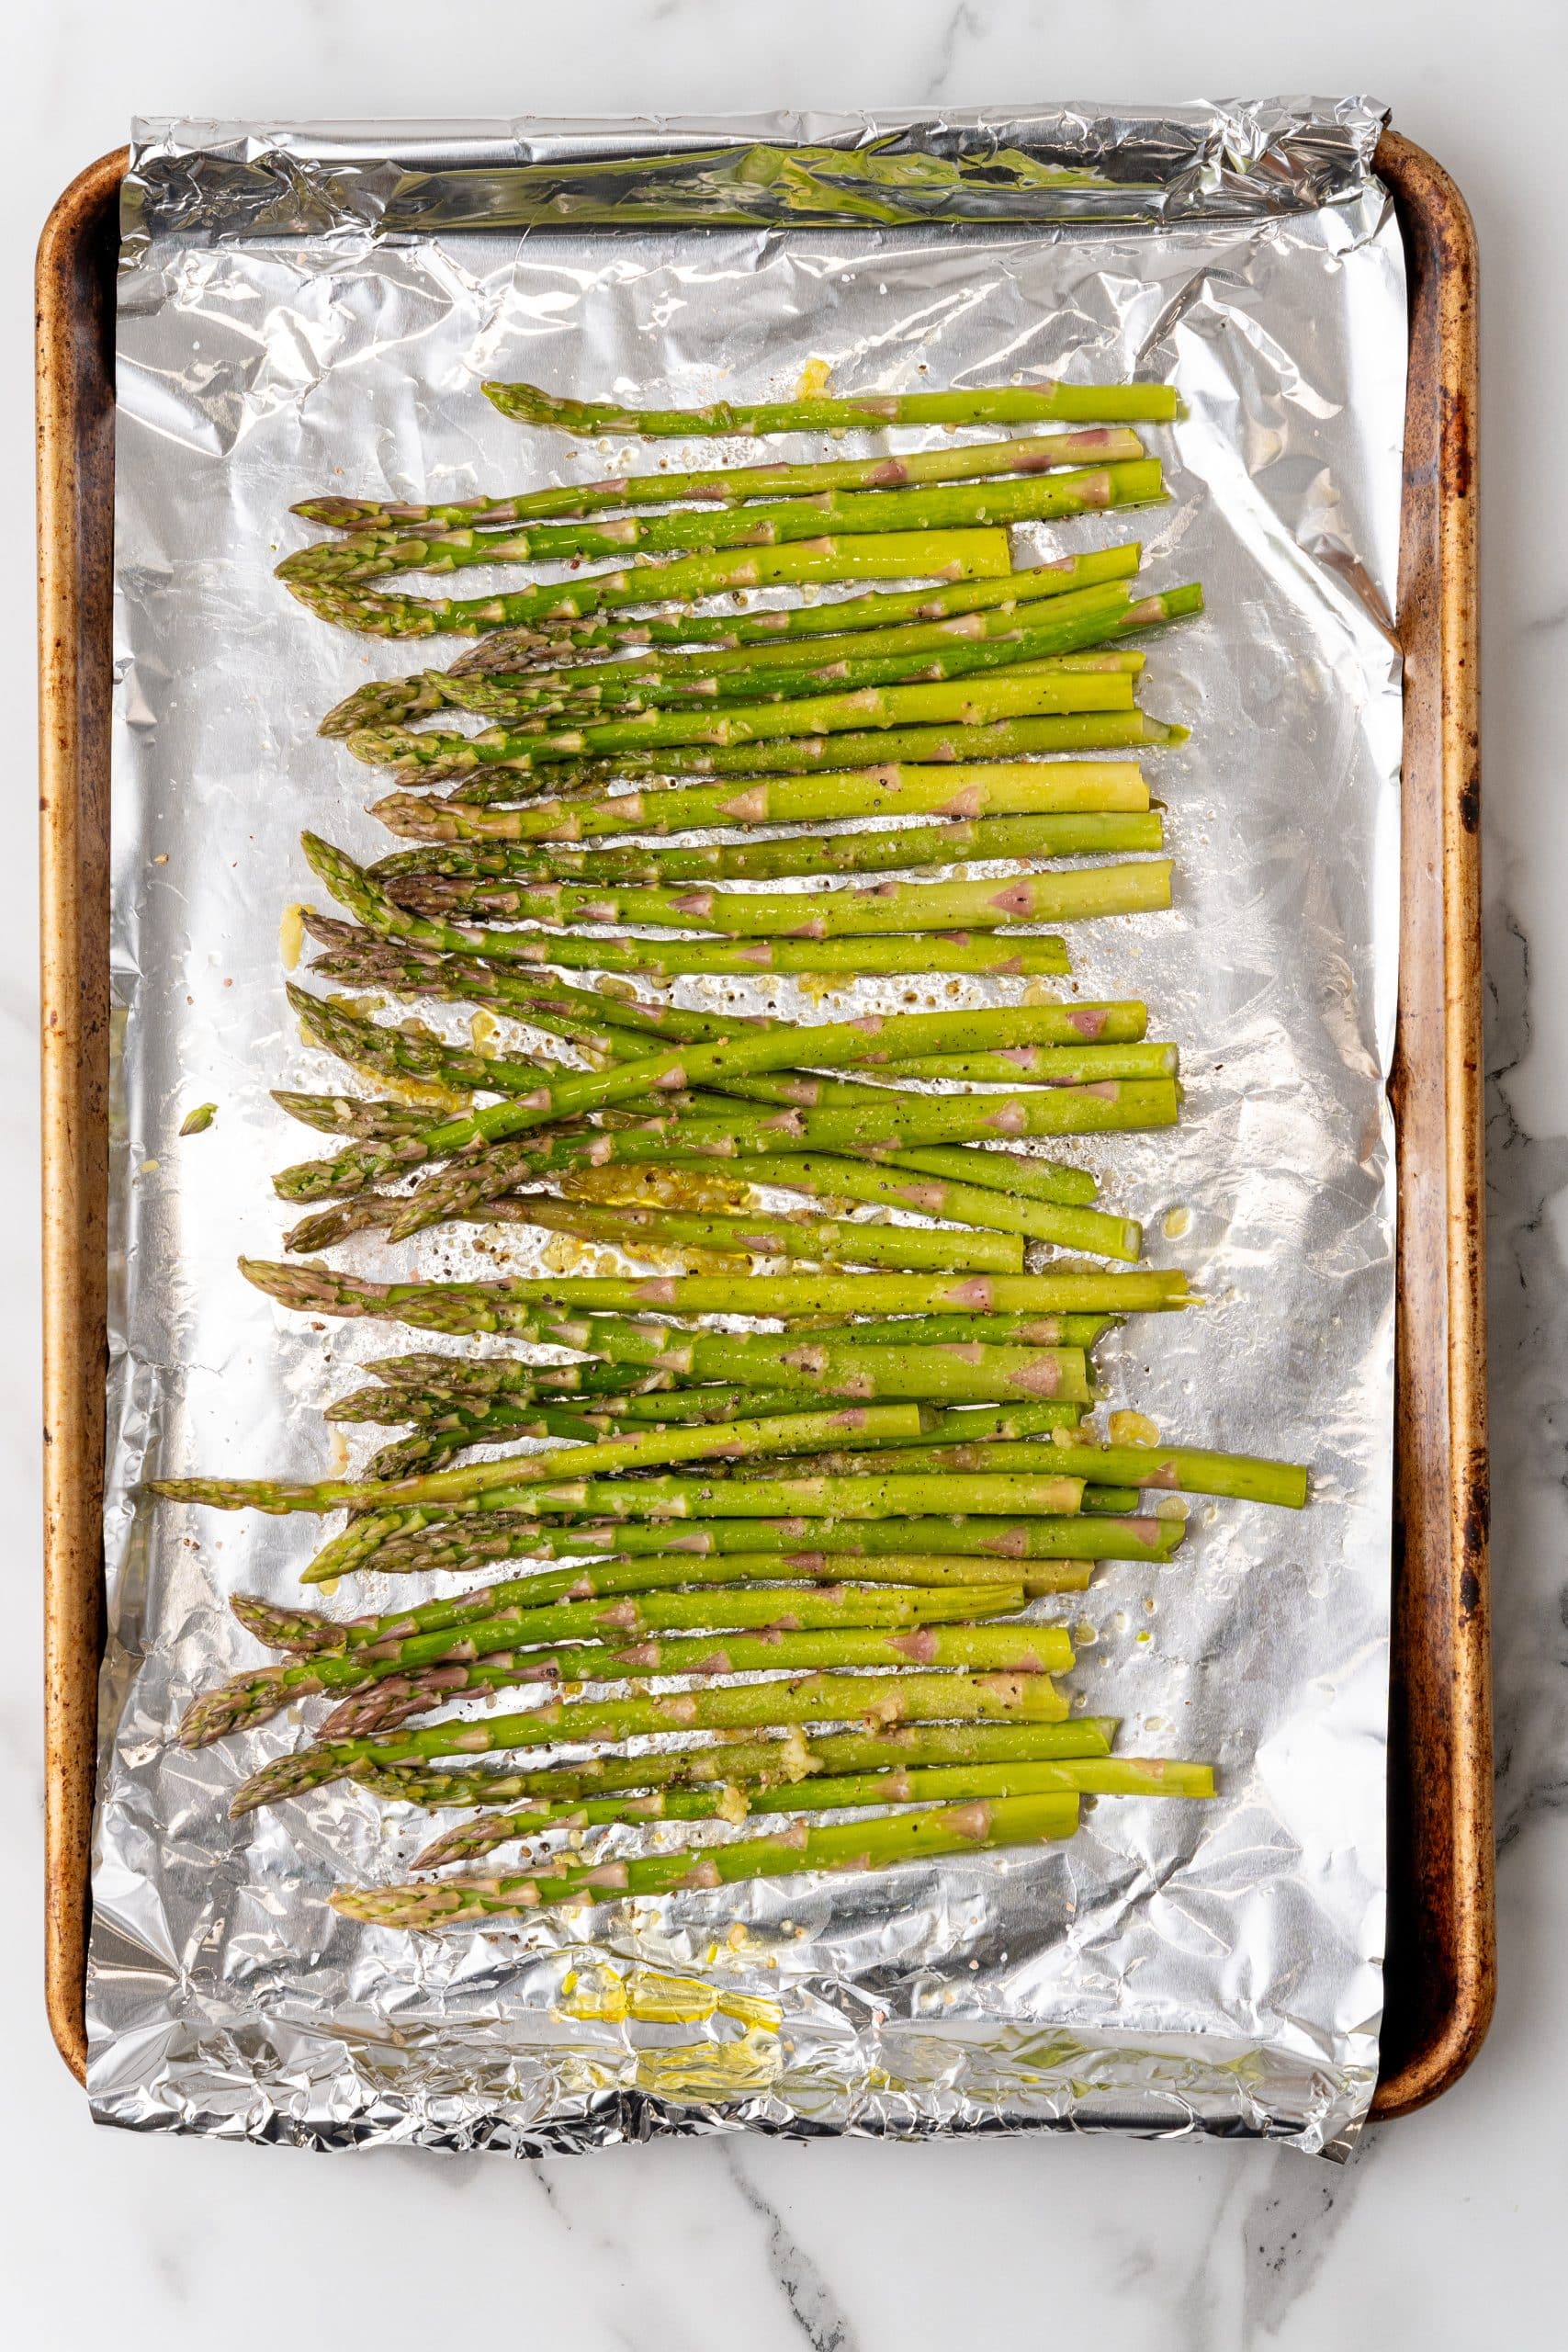 garlic and olive oil coated stalks of asparagus arranged in a single row on a foil lined baking sheet